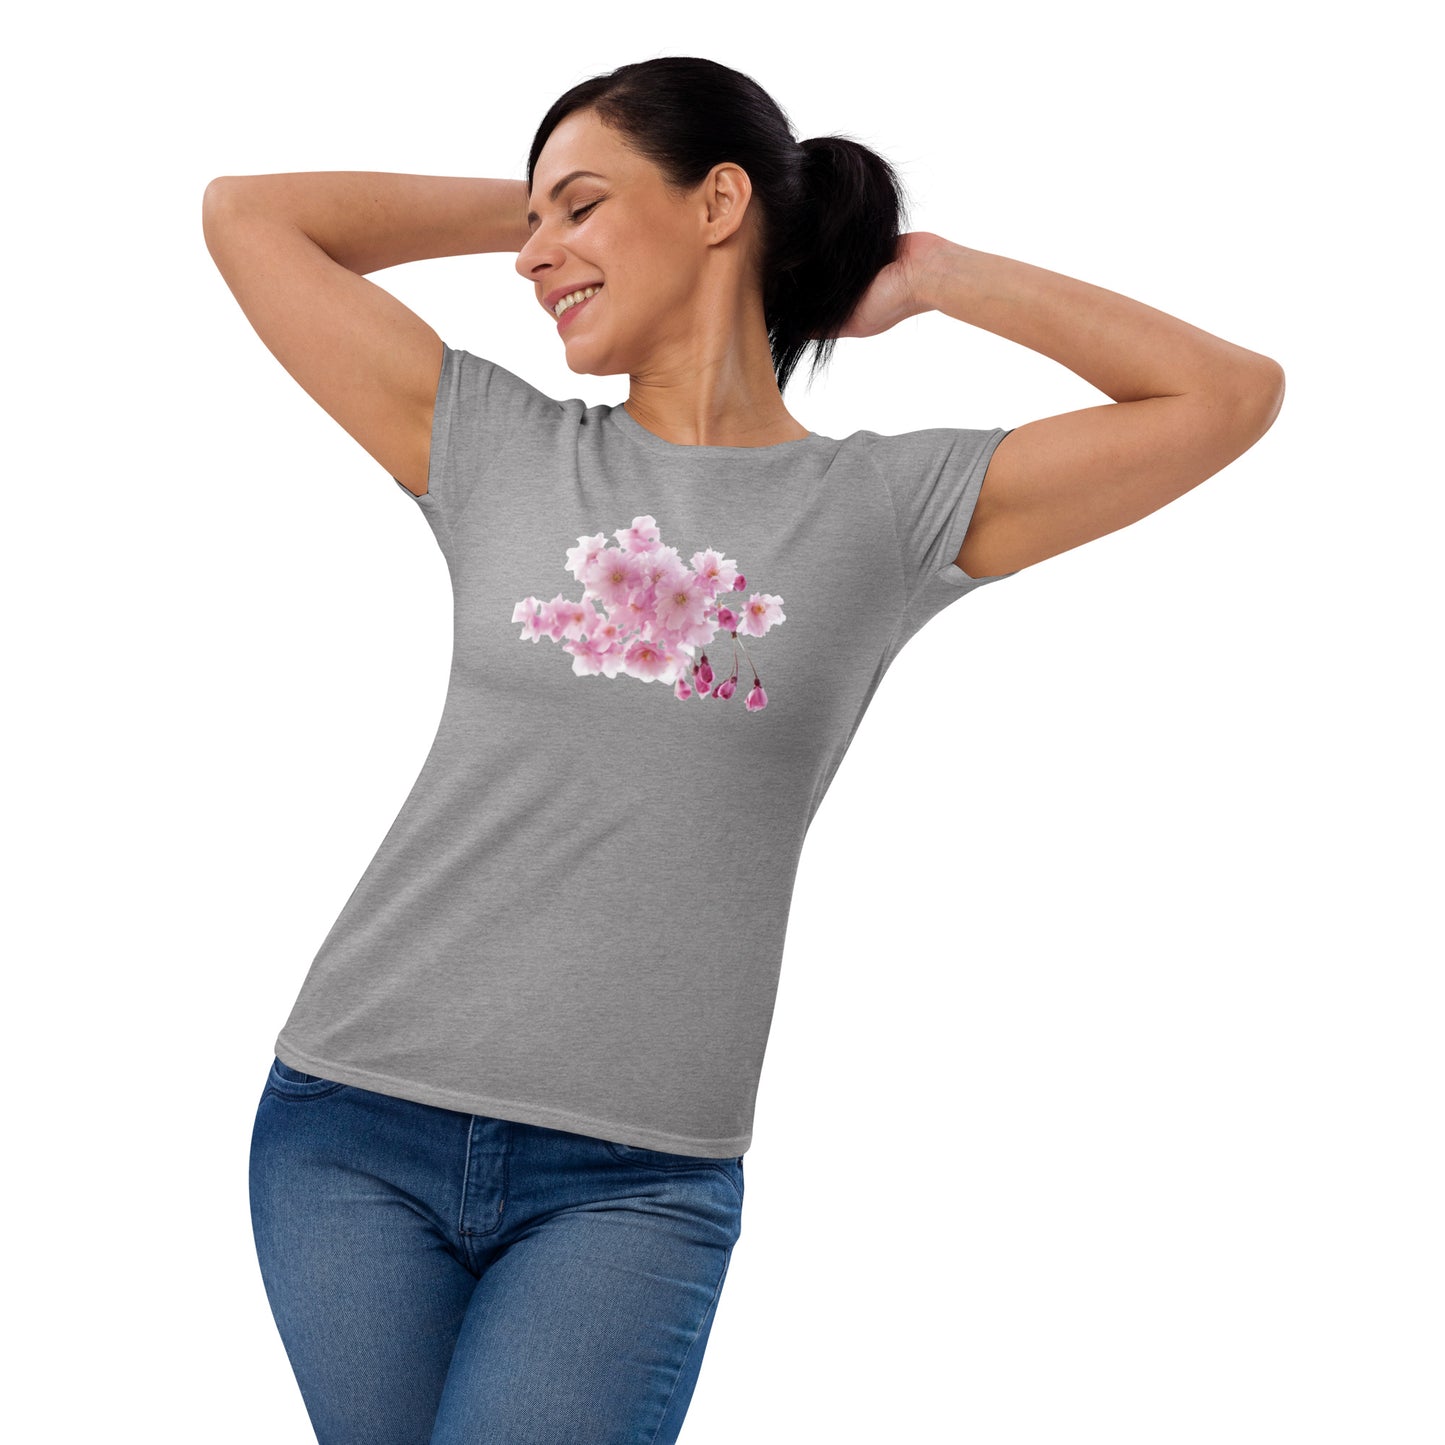 "Elegant Women's Short Sleeve T-Shirt with Cherry Blossoms - Supreme Comfort and Lasting Quality"